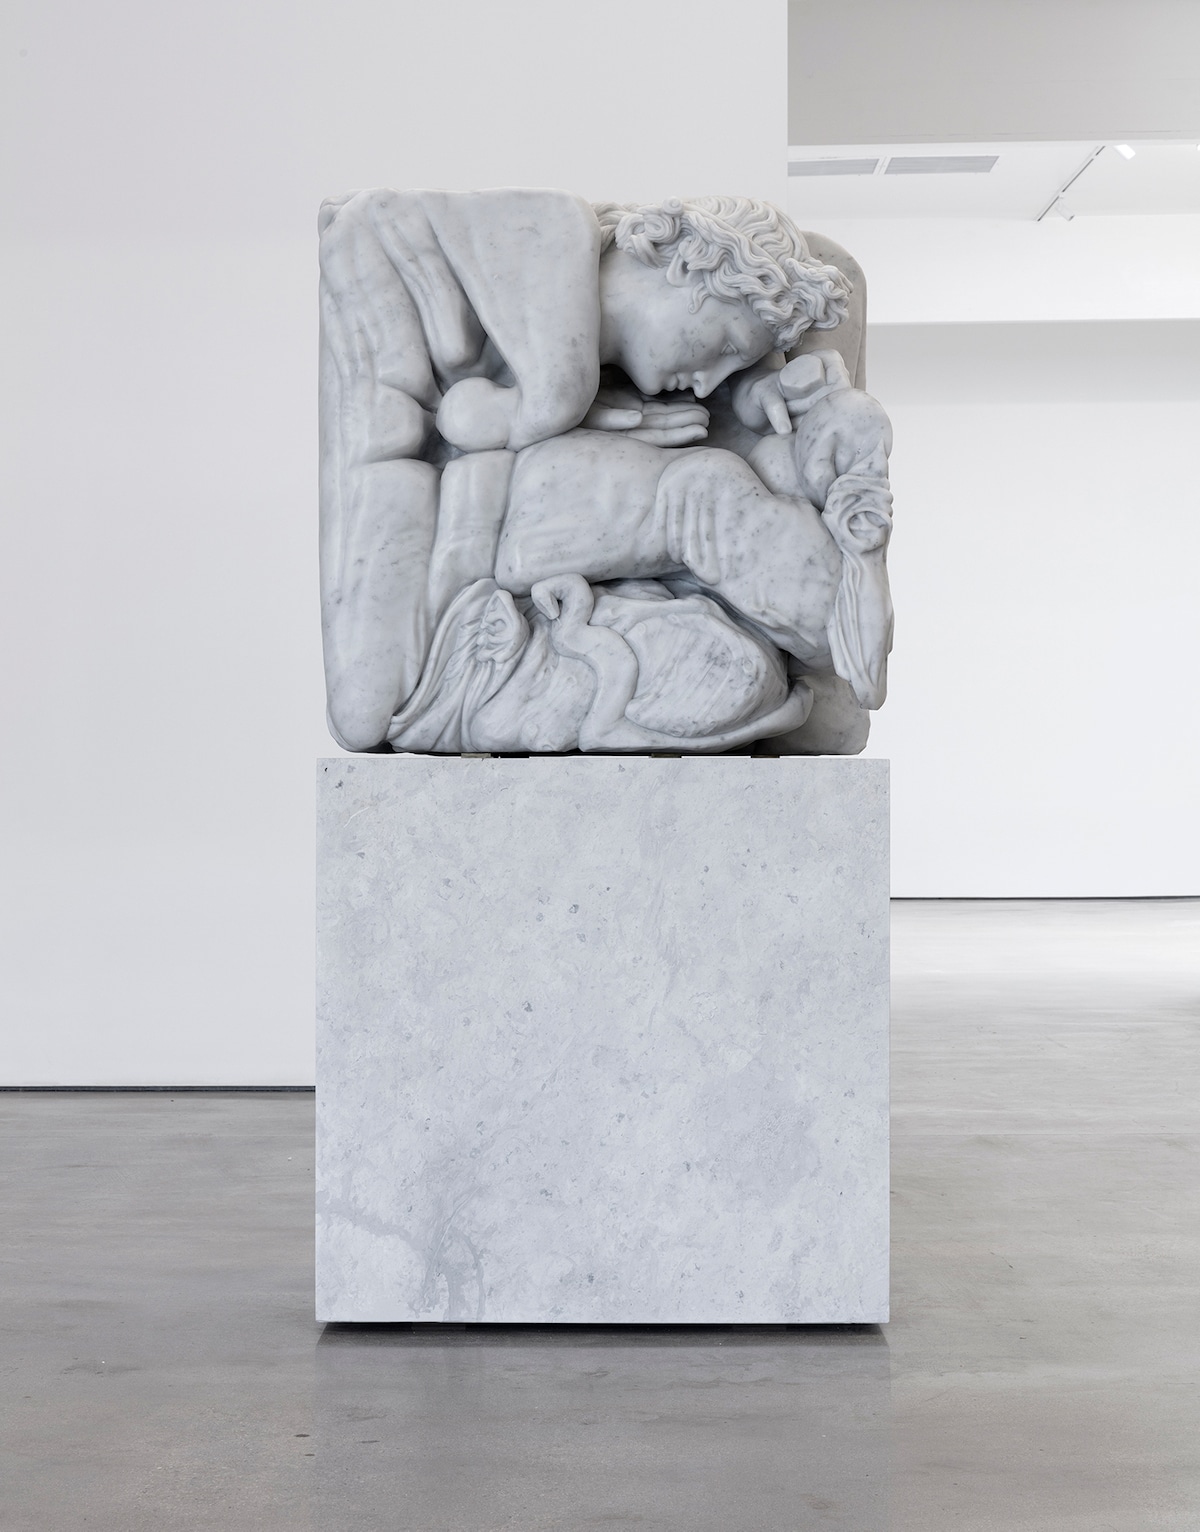 Artist Adam Parker Smith Compresses Classical Sculptures Into Small Marble Cubes (11)